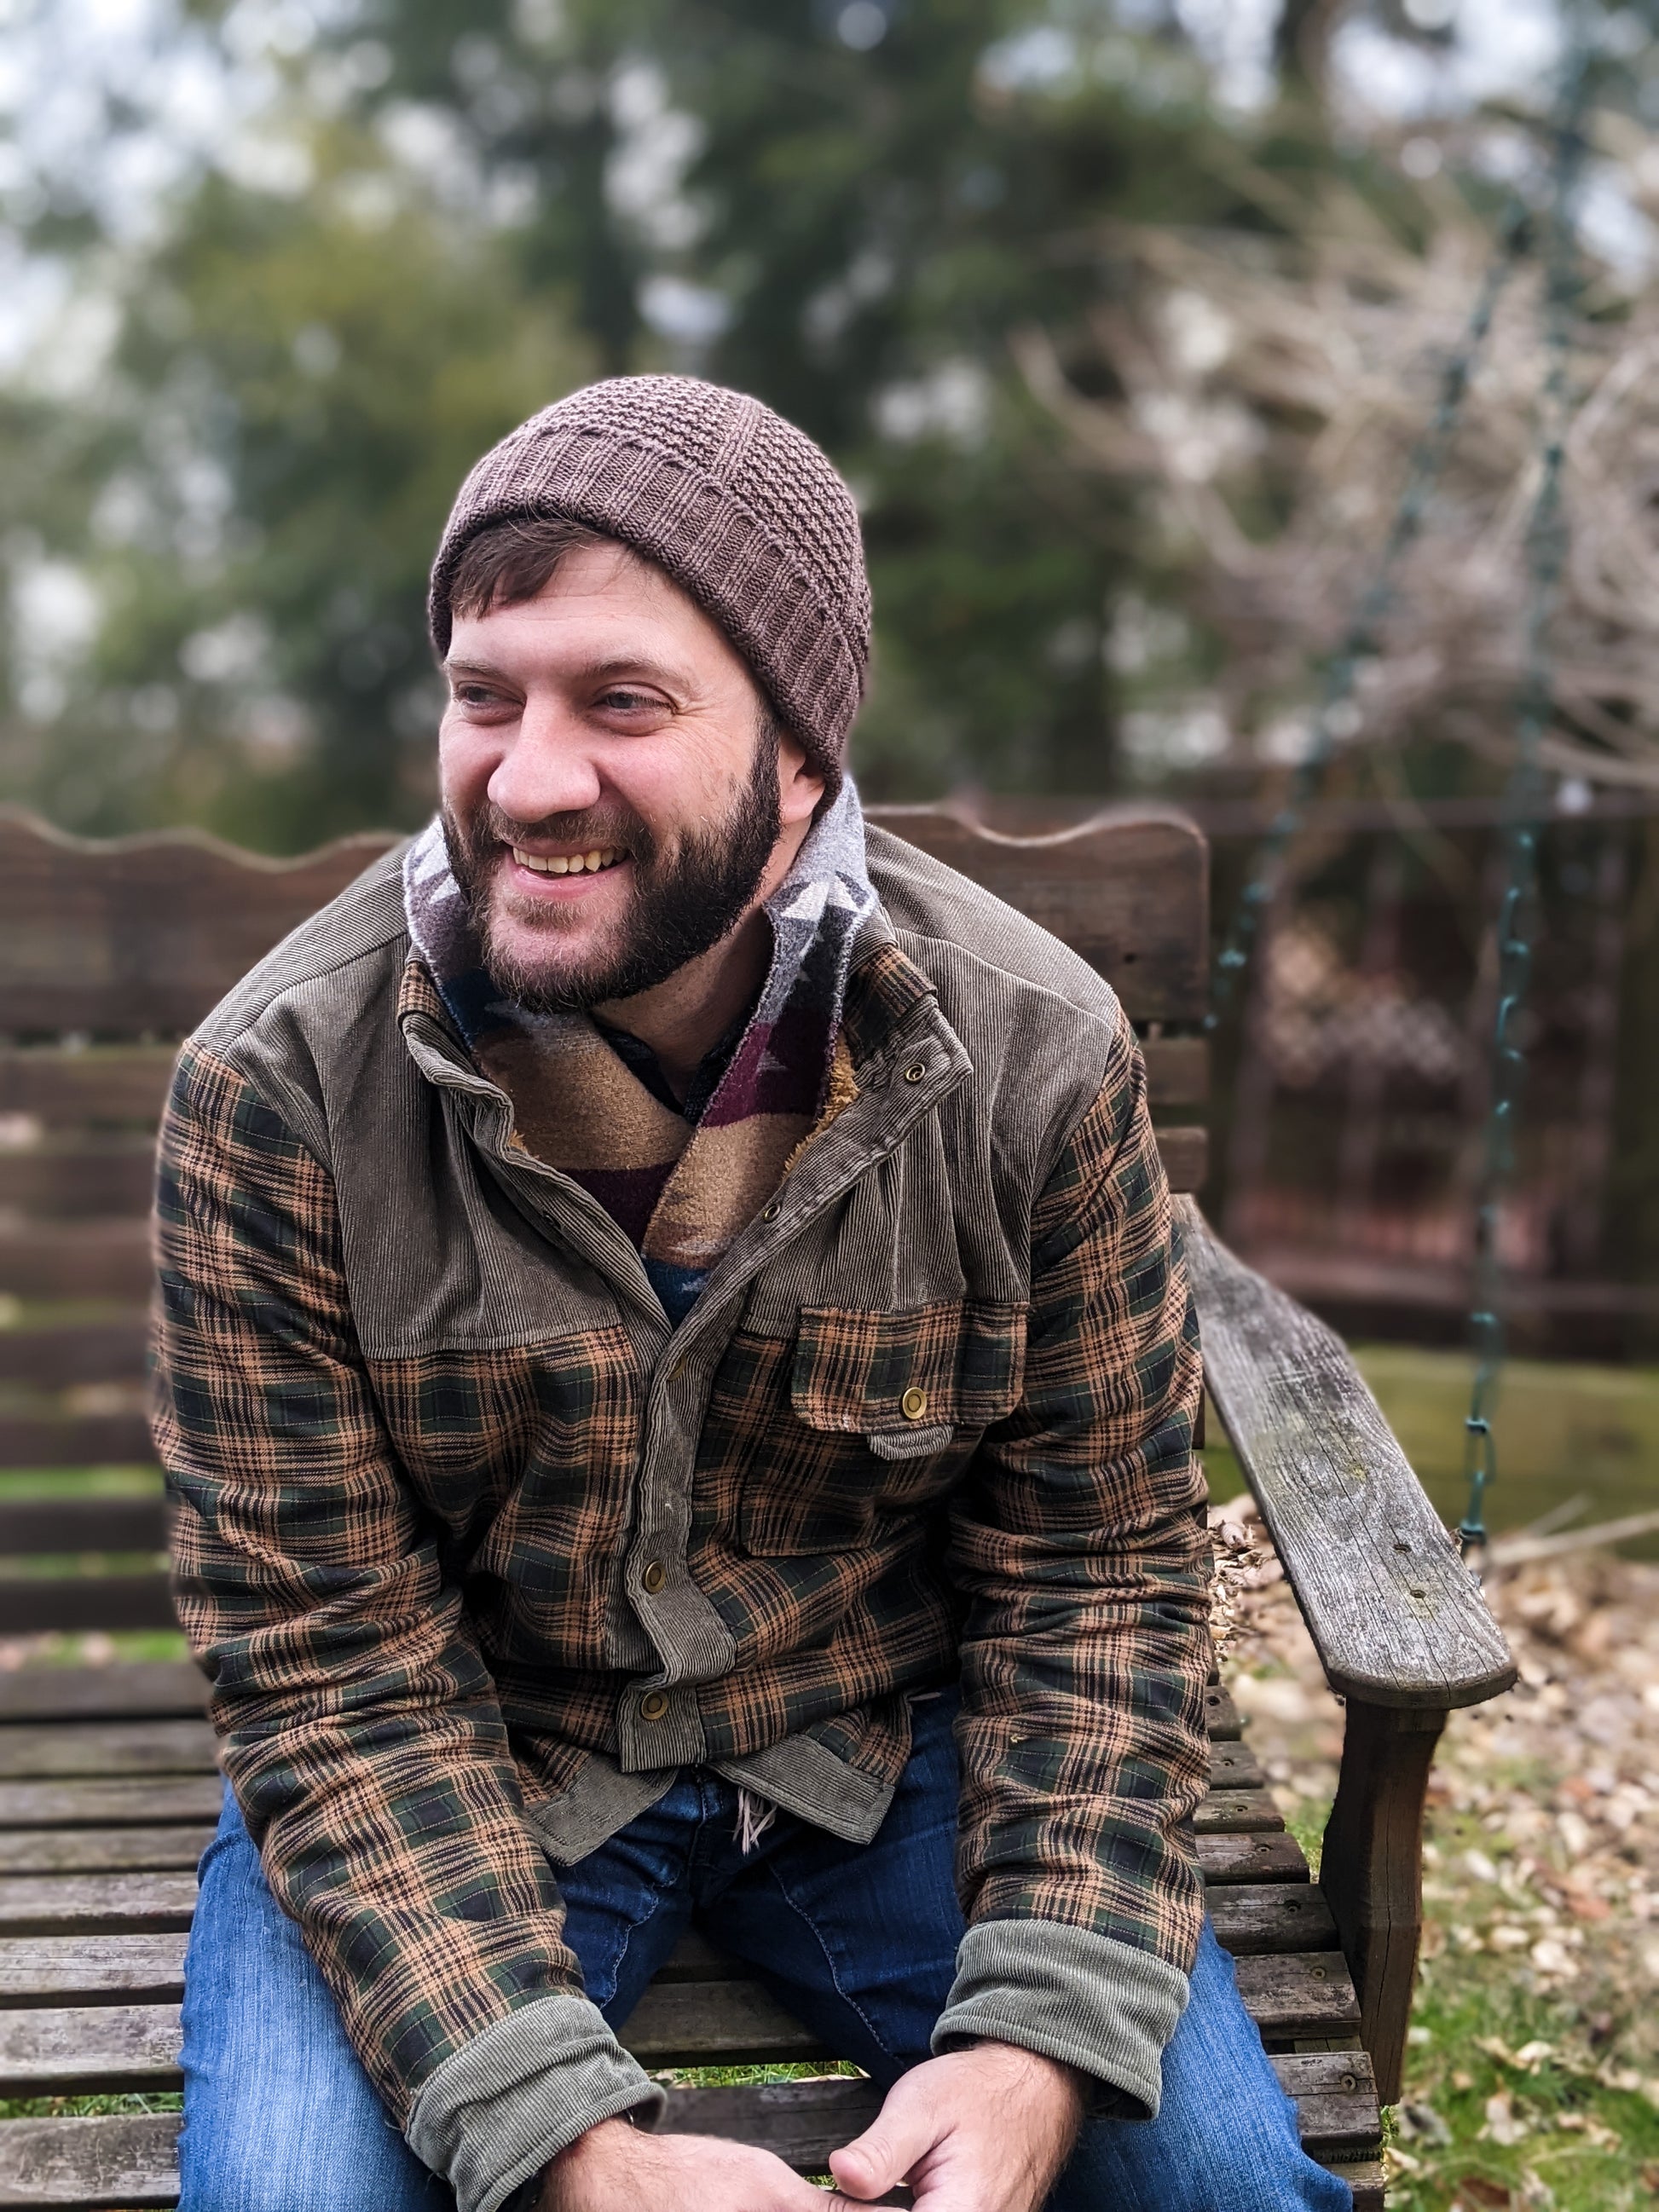 Drew, a man with a dark beard, sits outside on a bench. He wears a brown beanie, knit with a ribbed edge and a seed stitch design, with a brown coat and blue jeans.